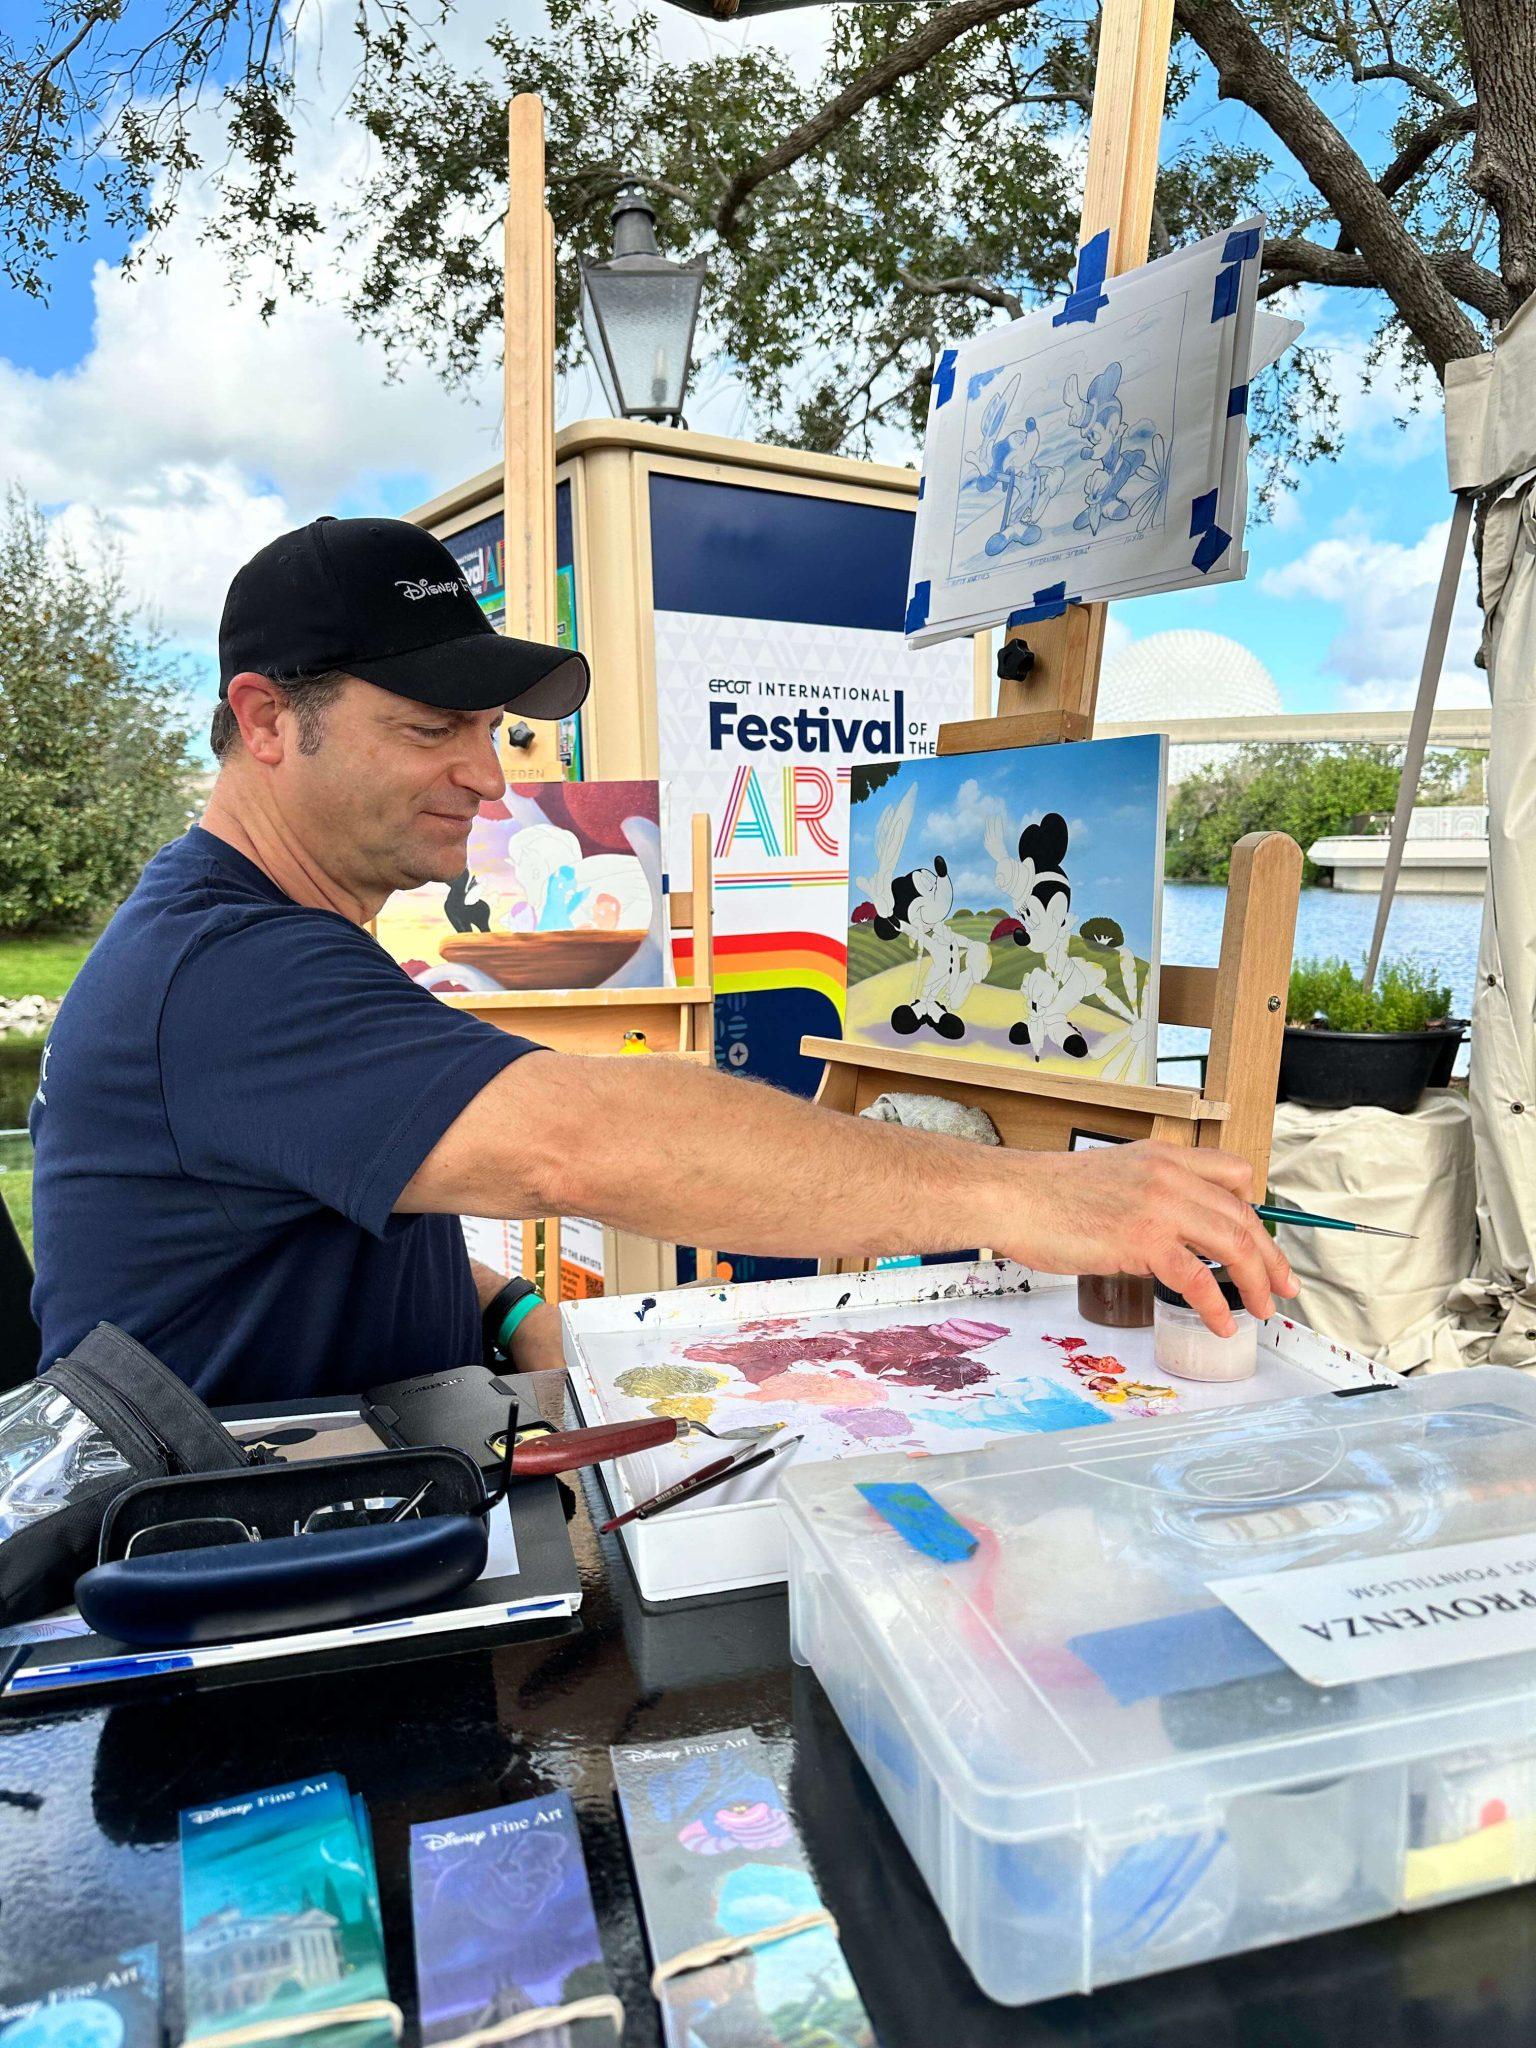 Michael Provenza live painting at Disney's Festival of the Arts